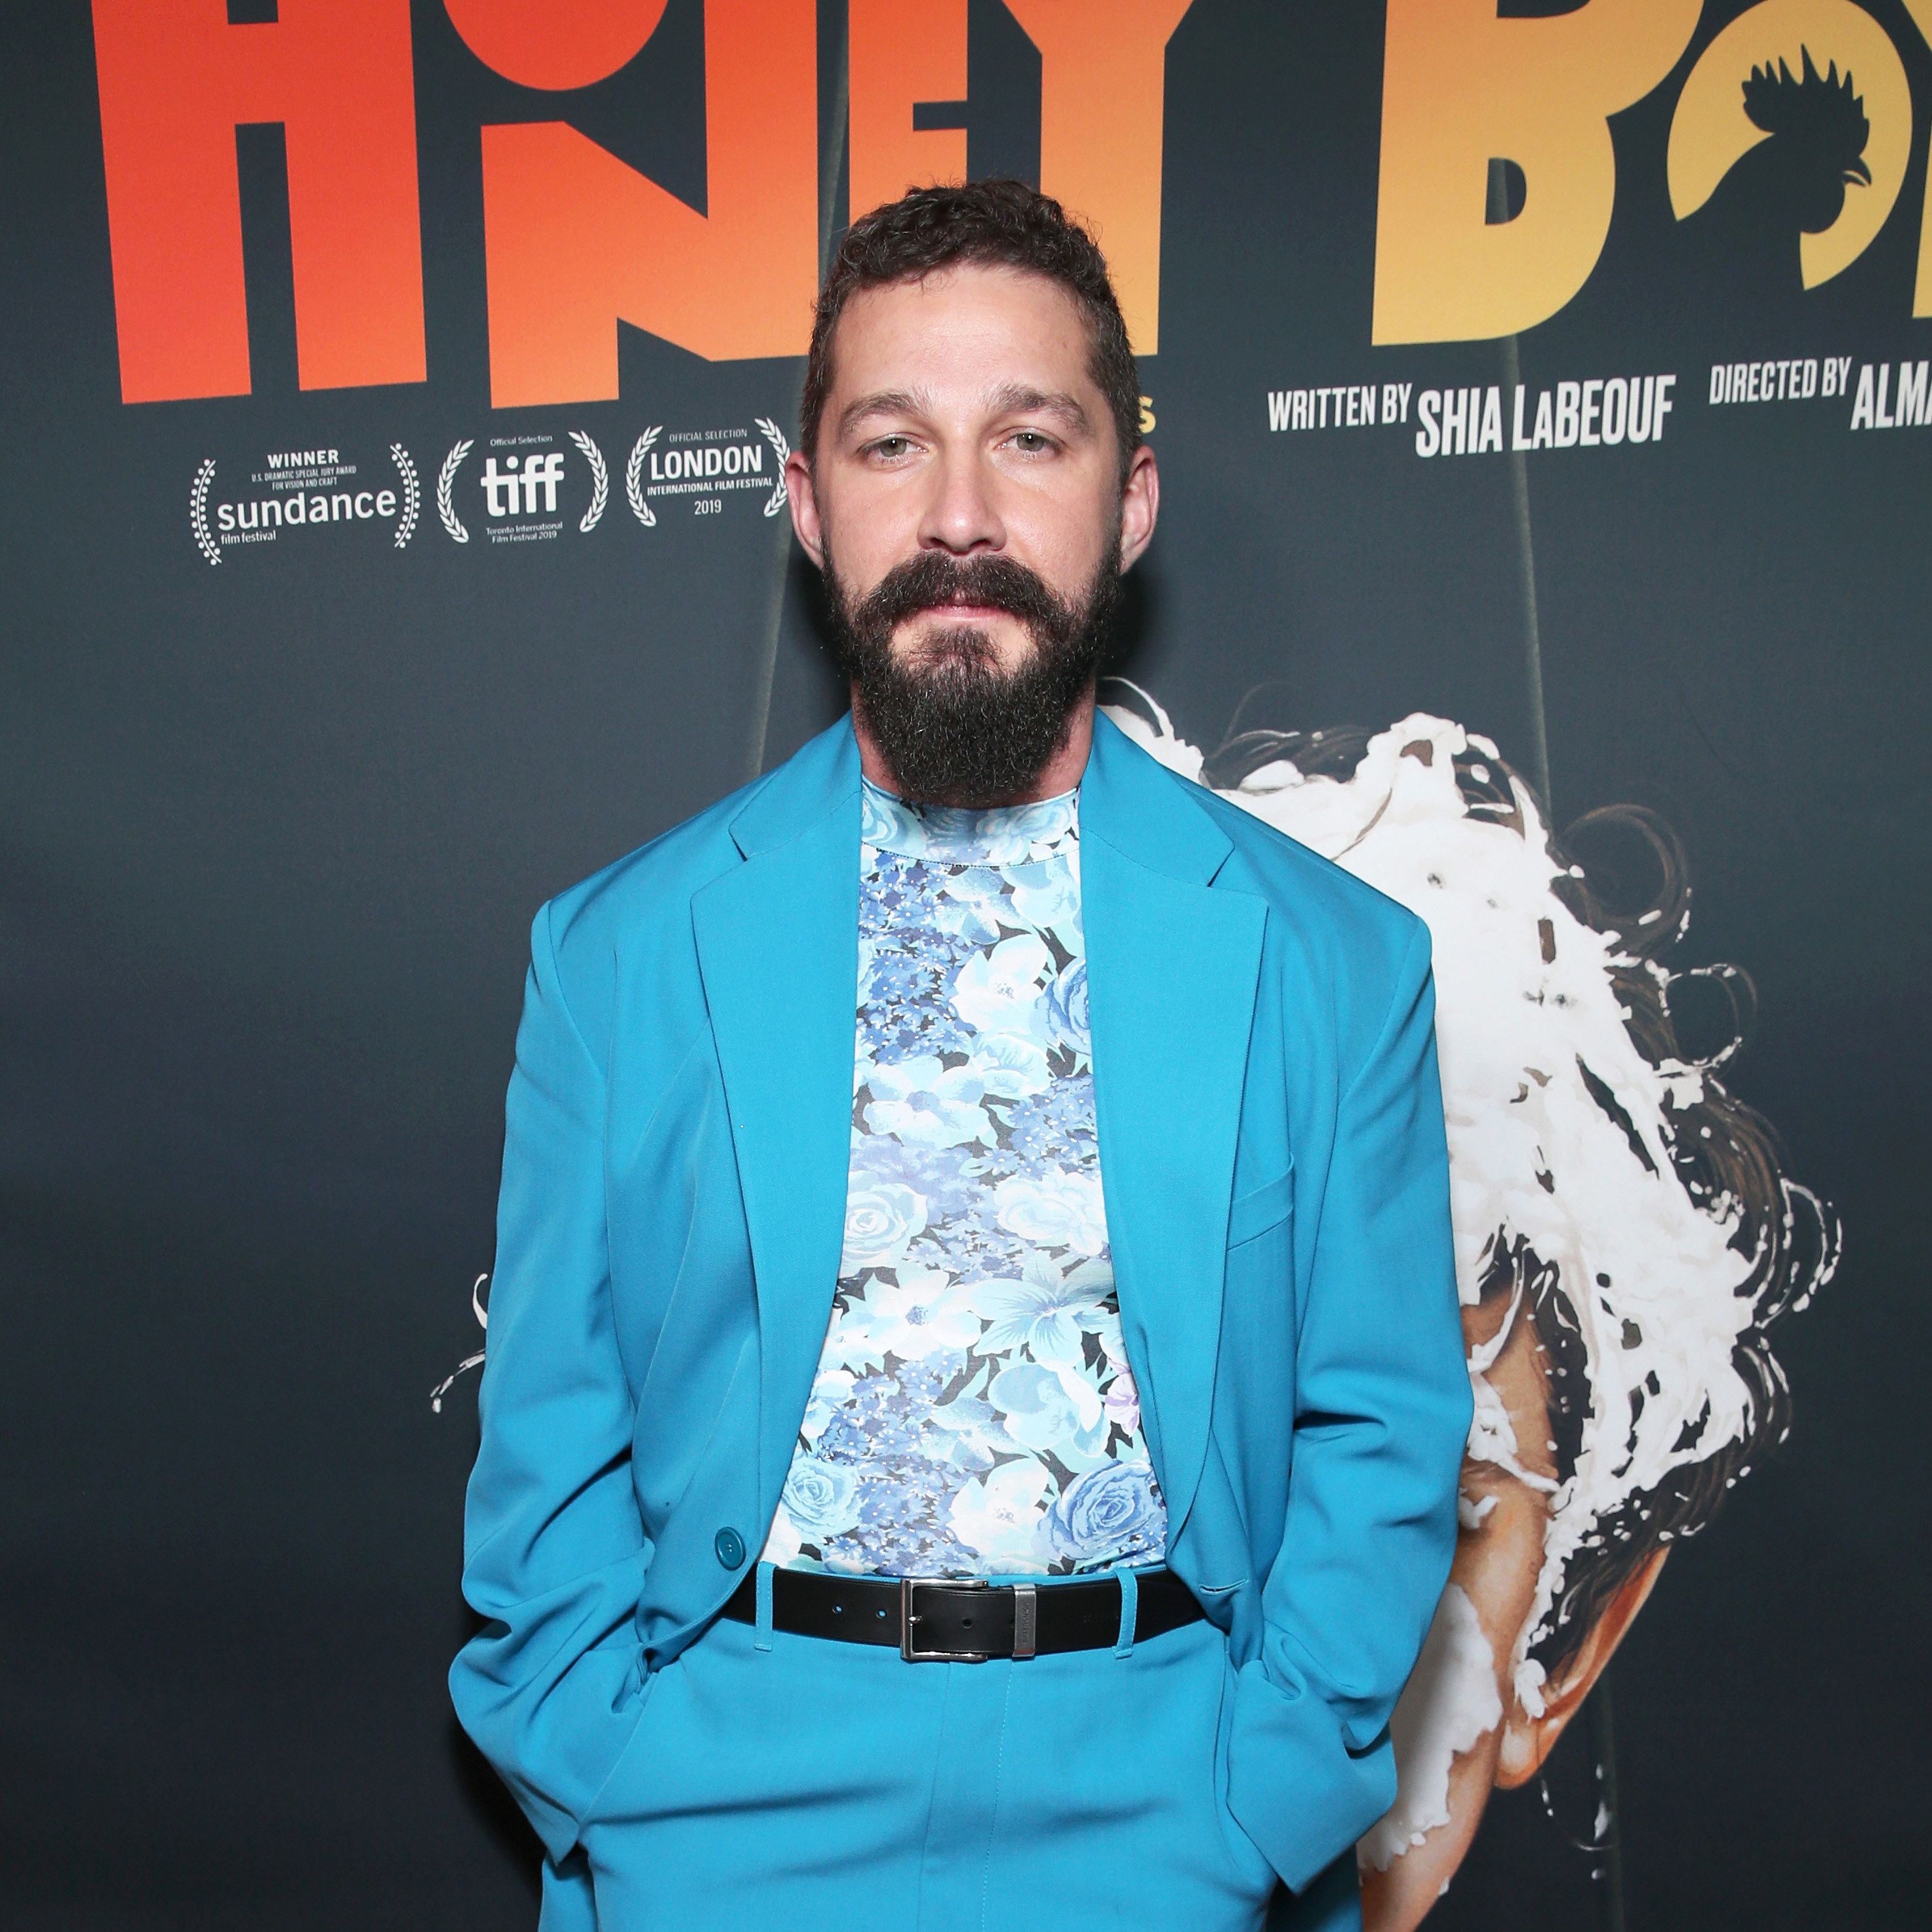 Shia on the red carpet wearing a suit and flowery shirt